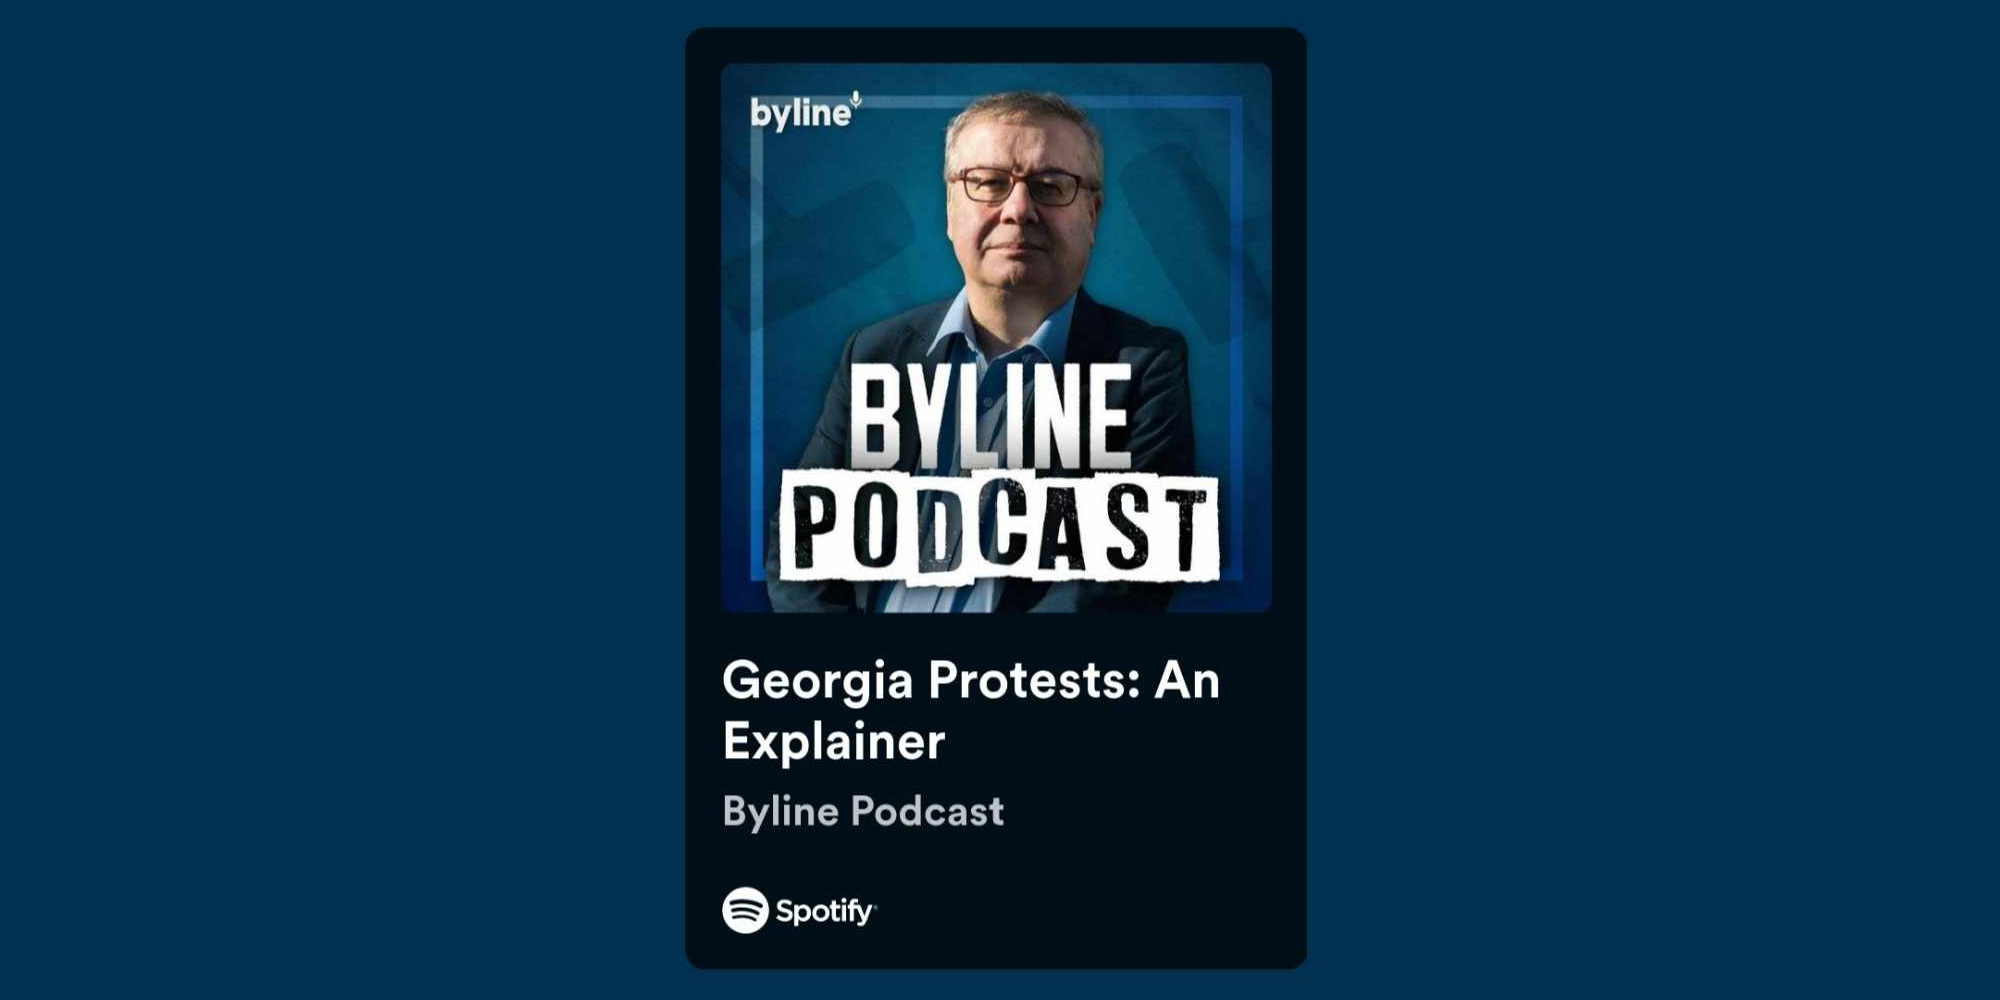 Georgia Protests: An Explainer